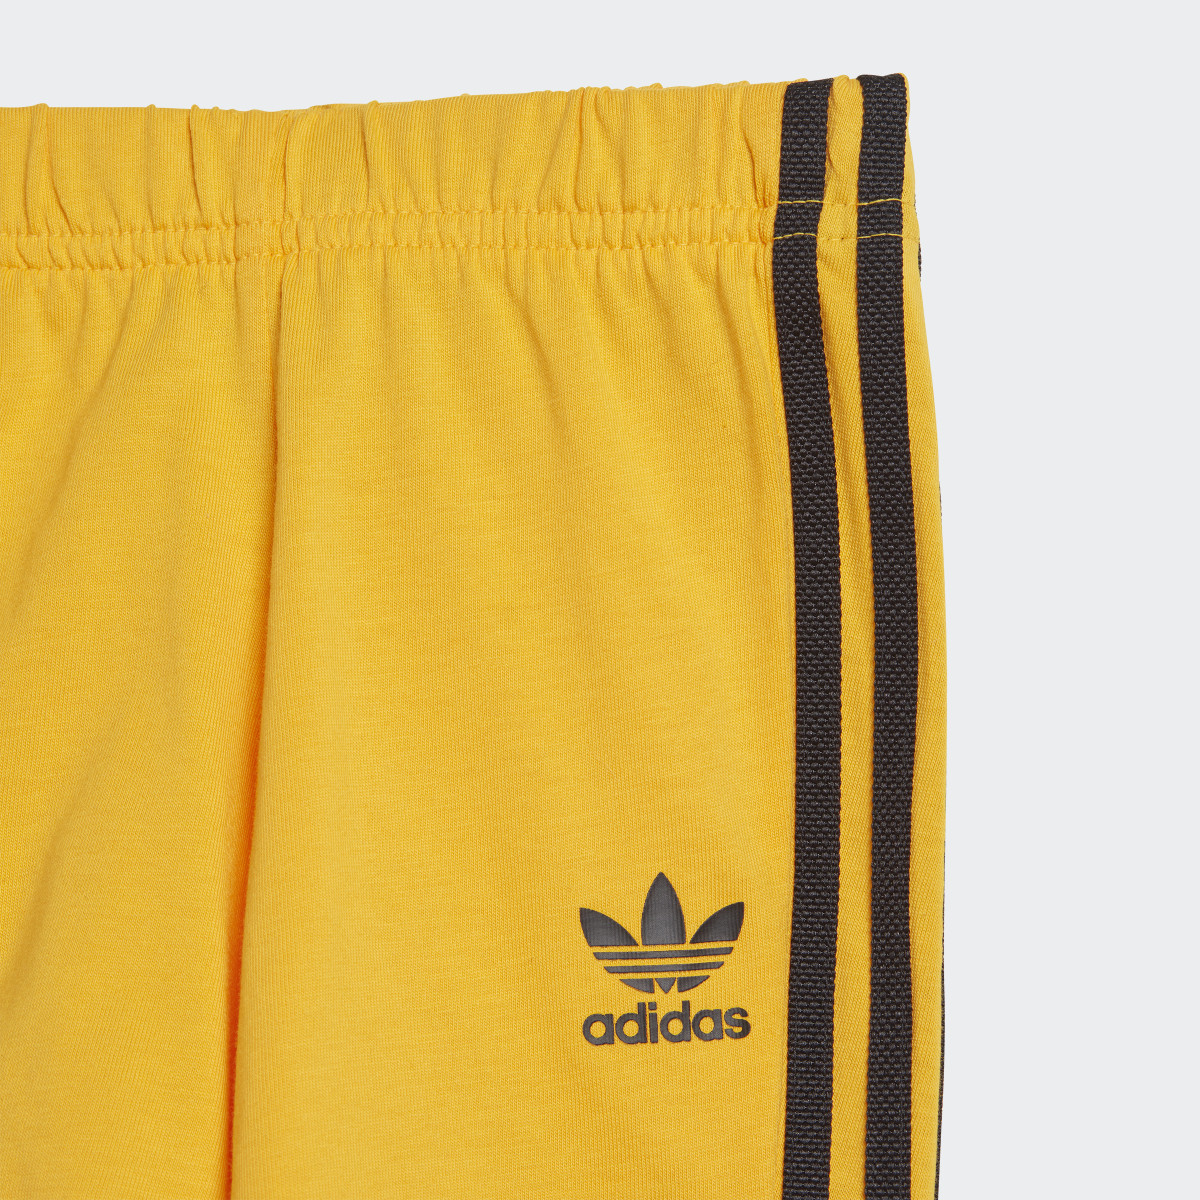 Adidas Completo adidas x James Jarvis Shorts and Tee. 9